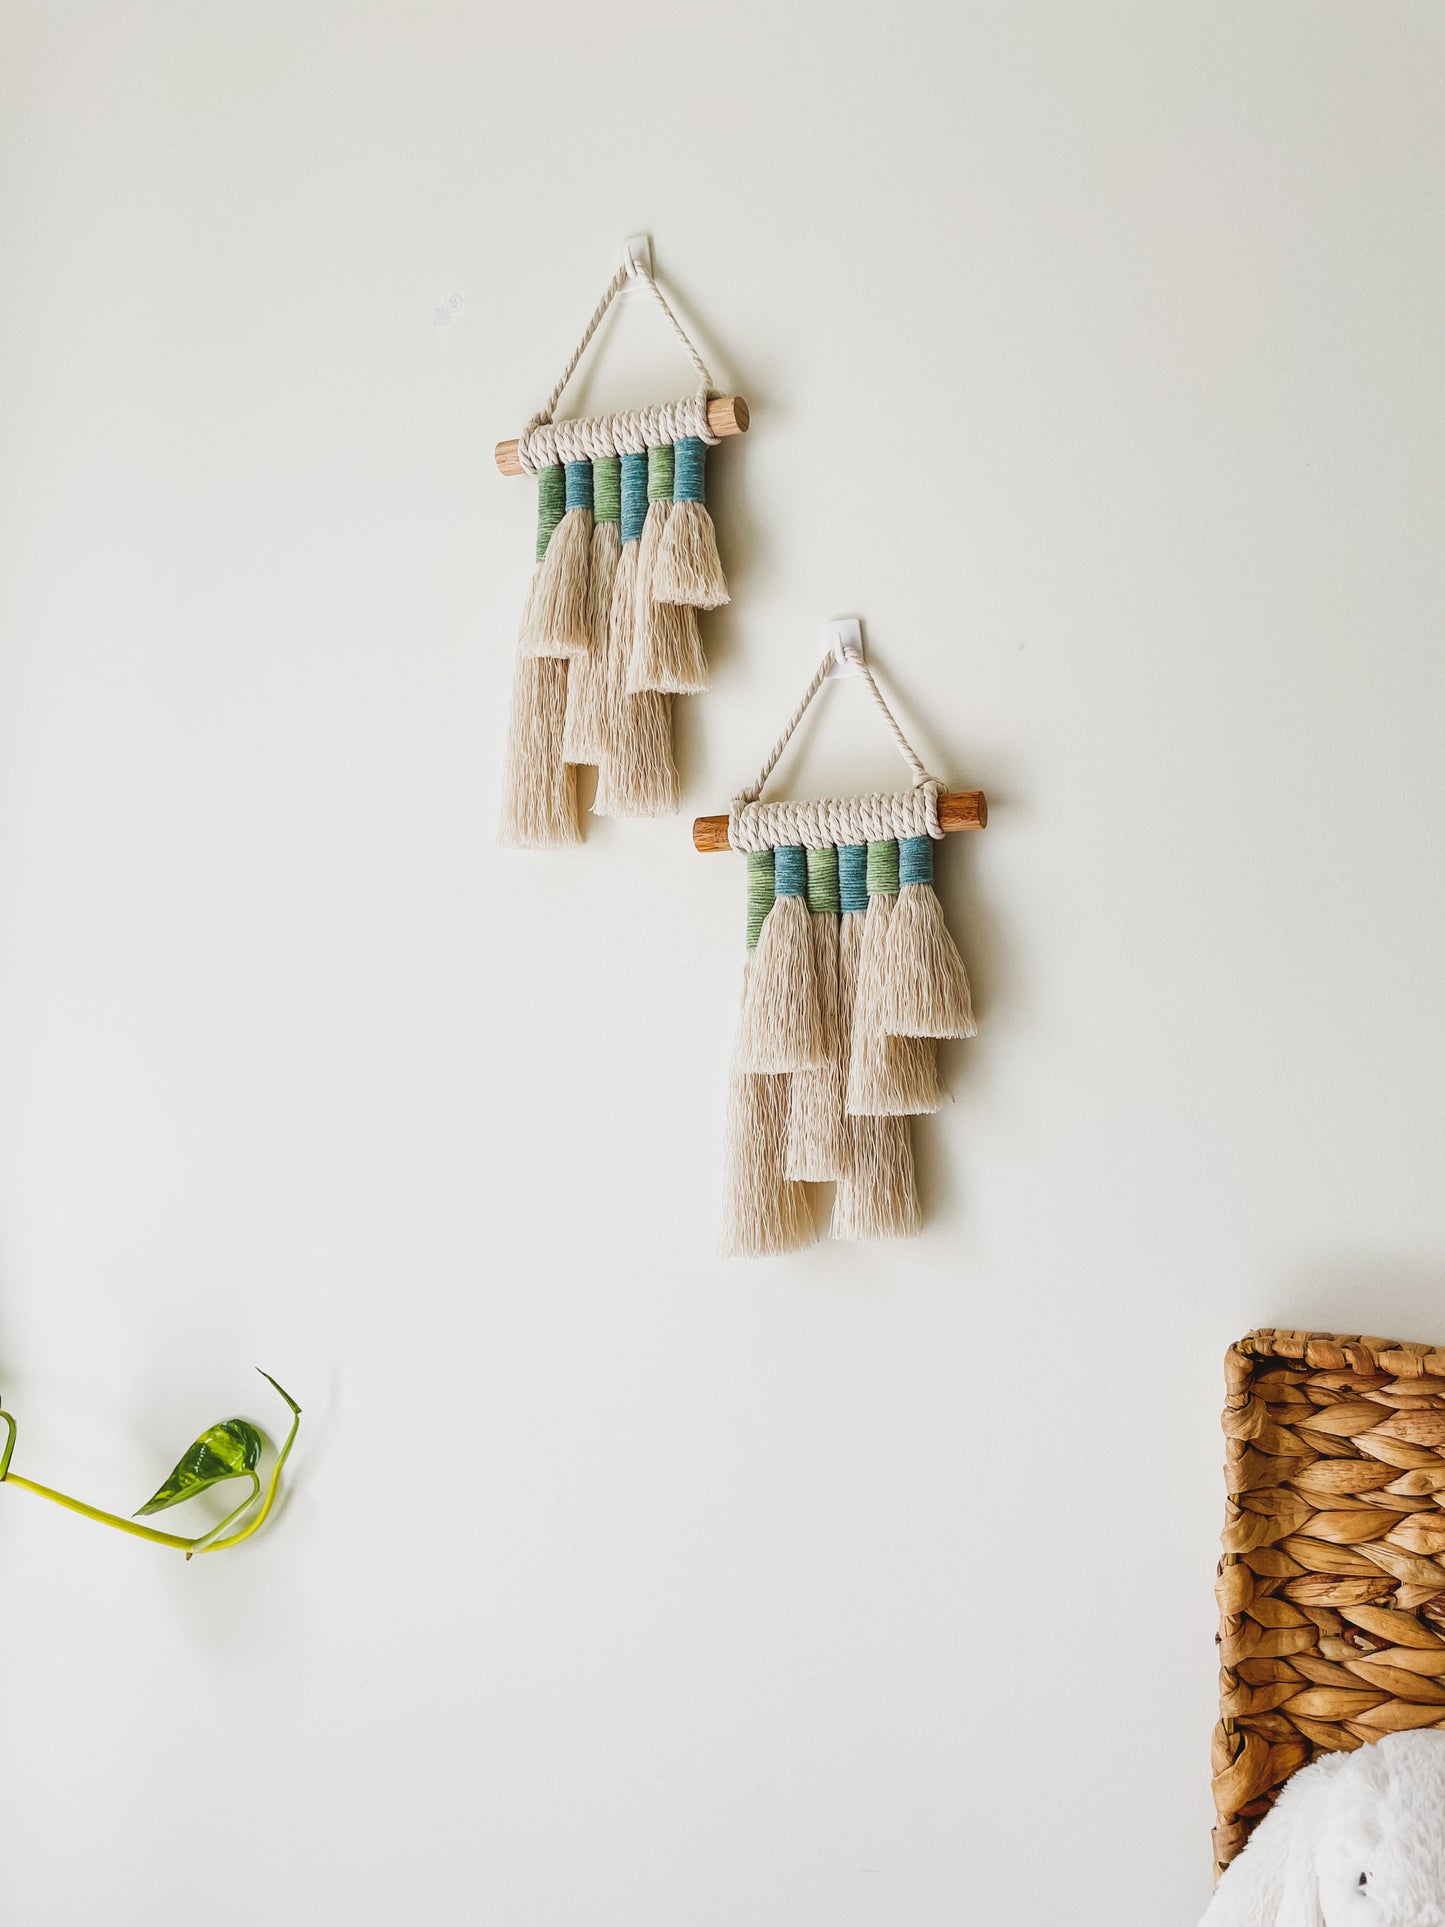 Ocean Breeze Mini wall hangings hanged on a wall - close up photo